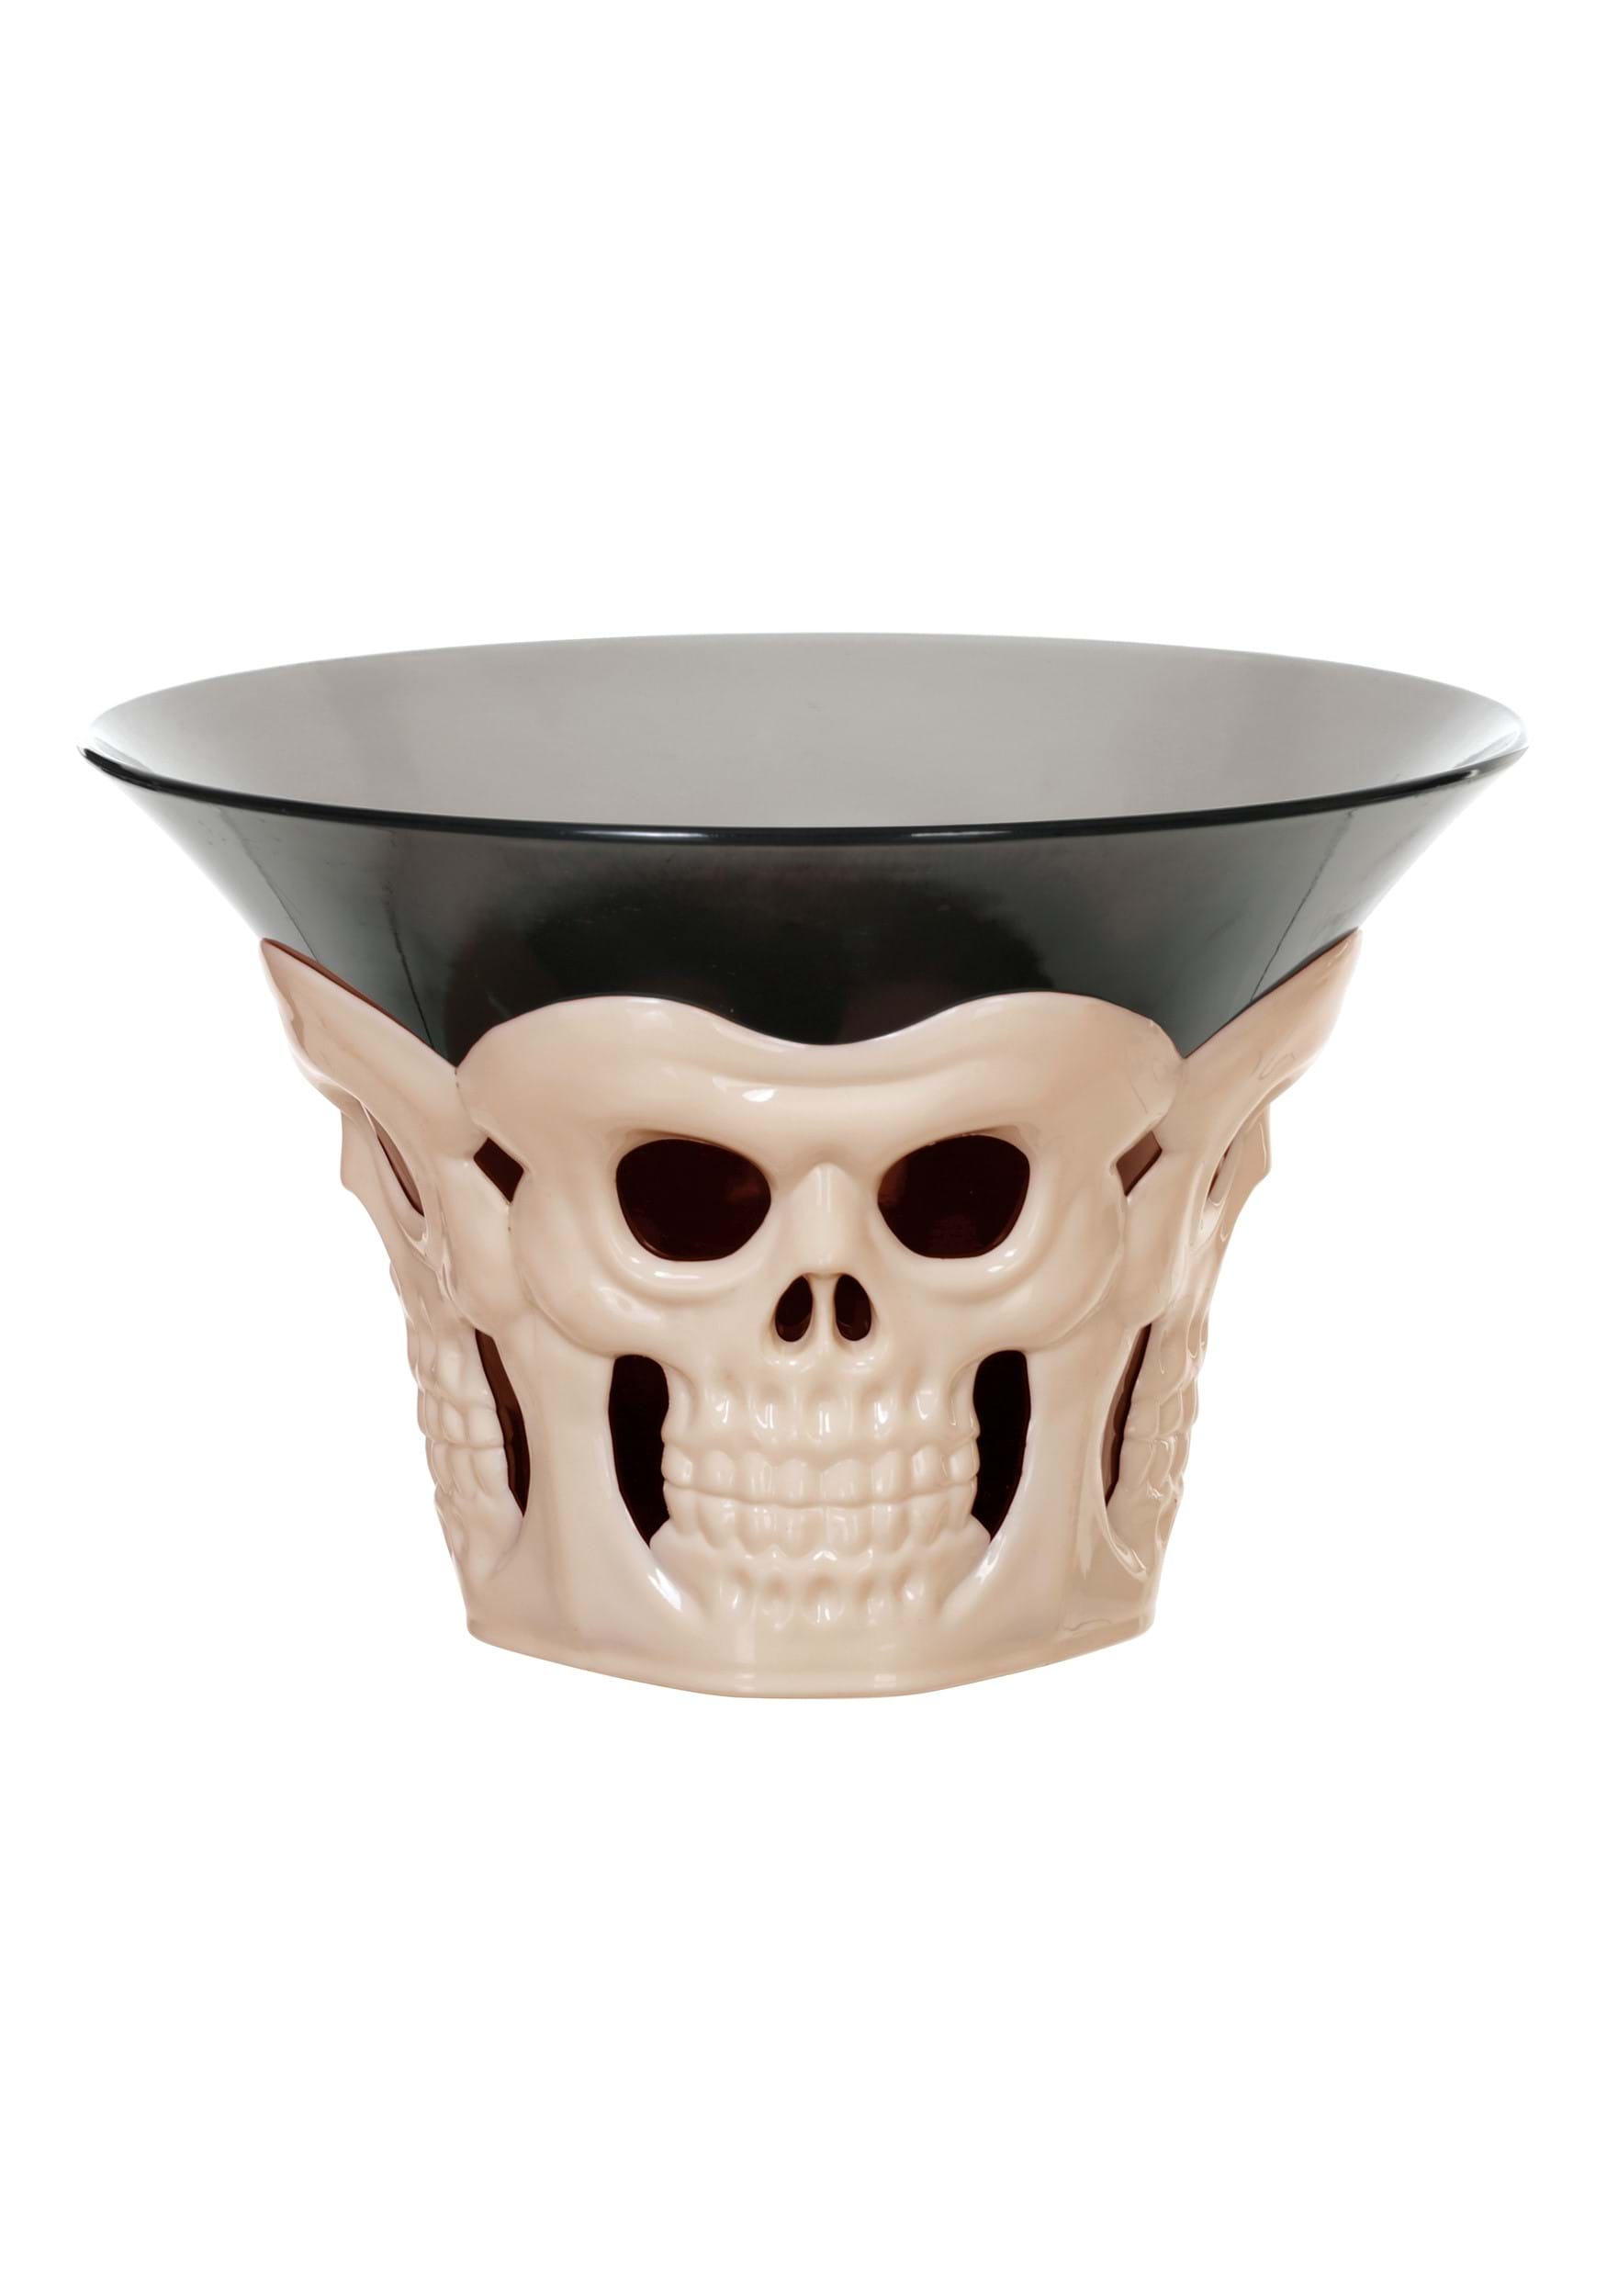 4.5-Inch Skull Candy Bowl Decoration